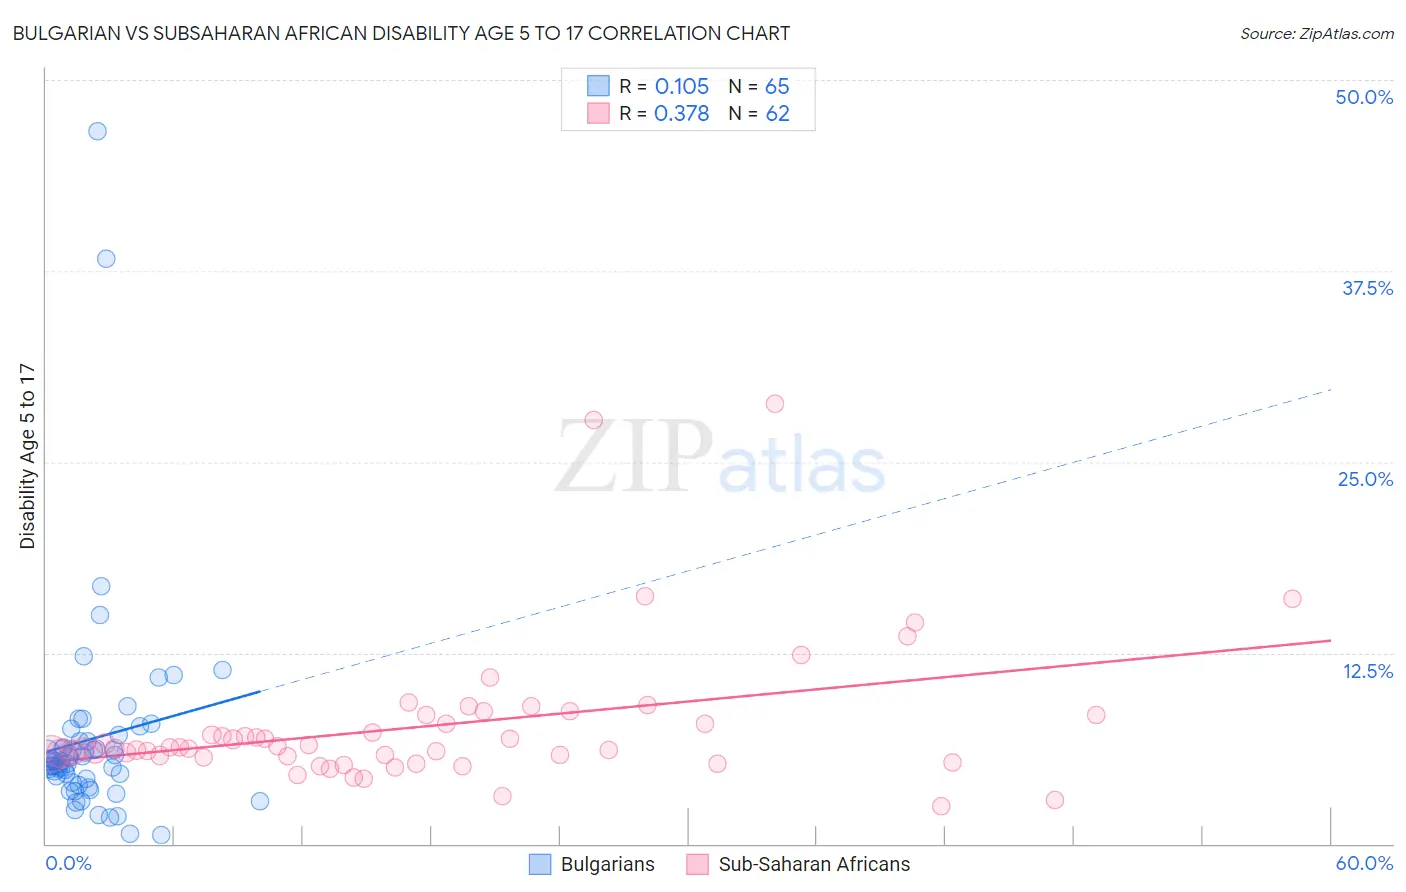 Bulgarian vs Subsaharan African Disability Age 5 to 17